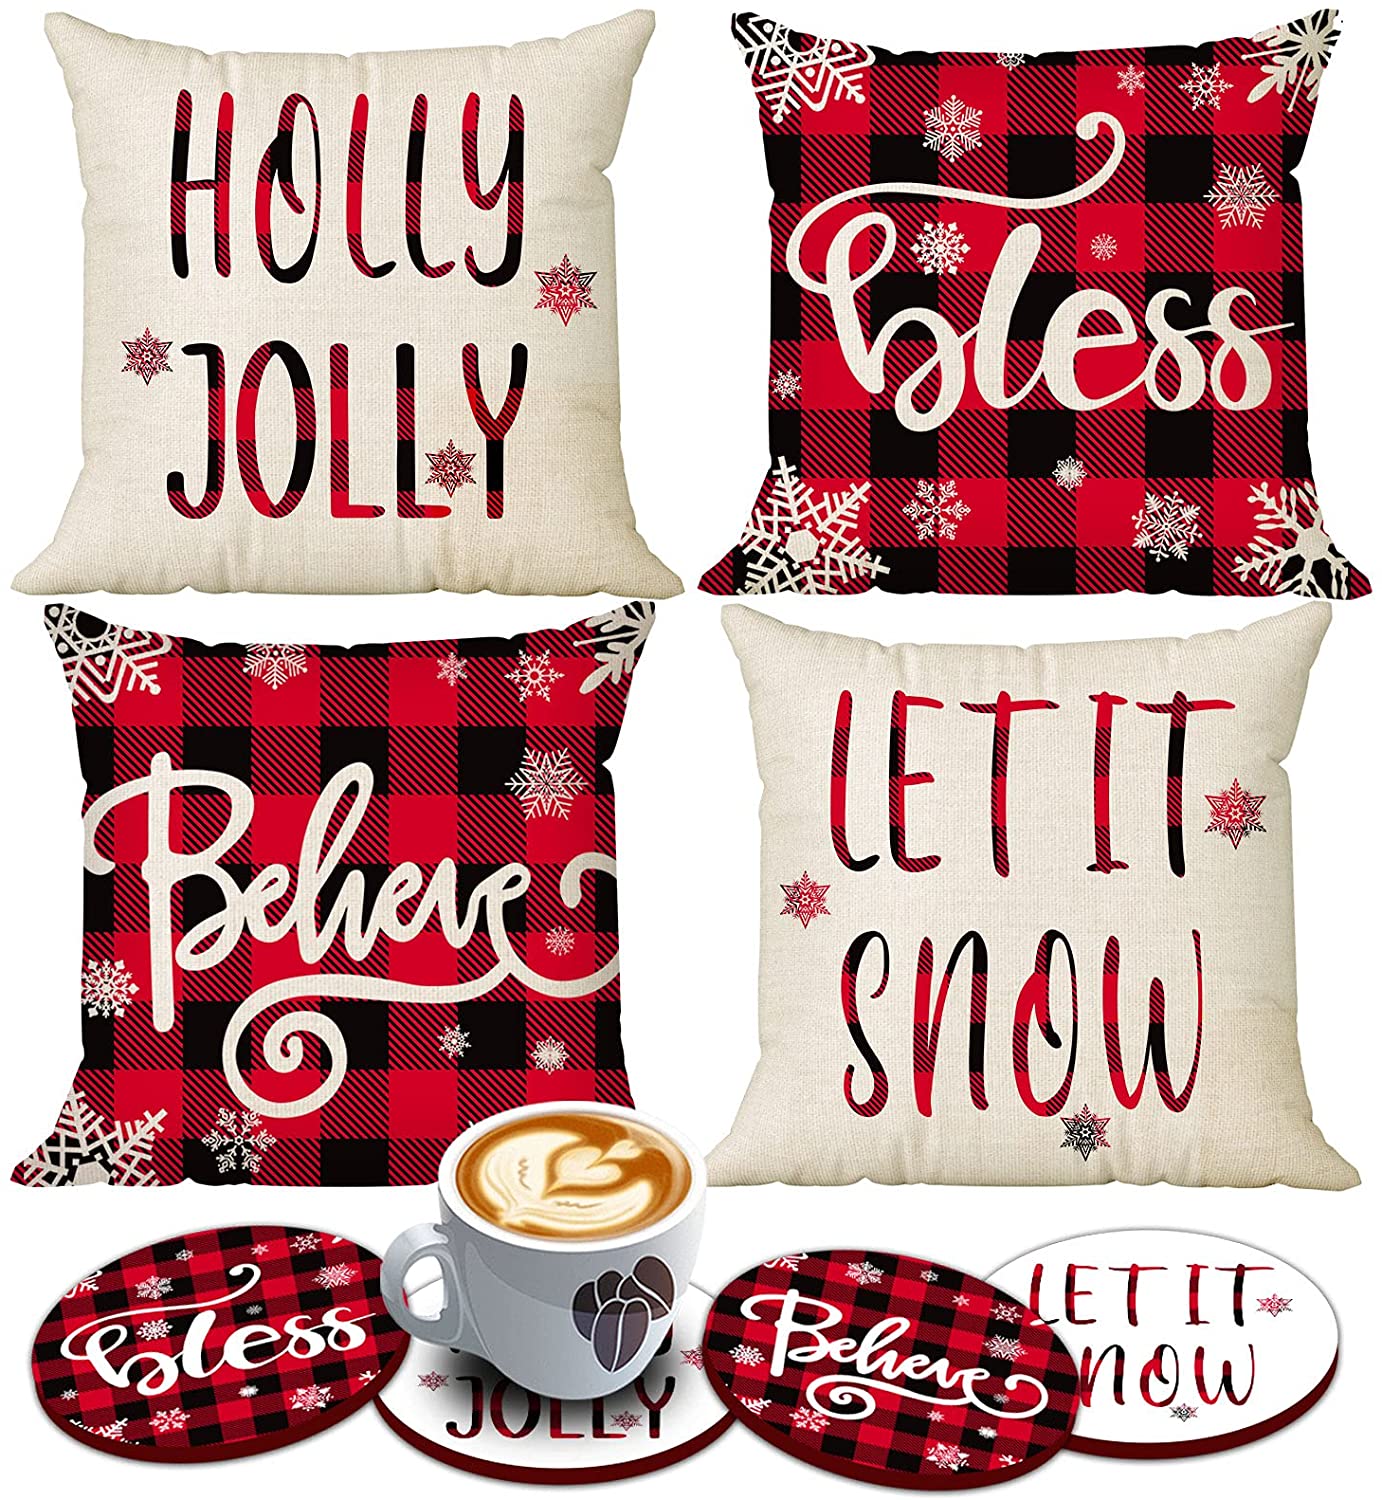 Set of 4 Christmas Pillow Covers 18x18 with 4 Bonus Coasters (Let It Snow)